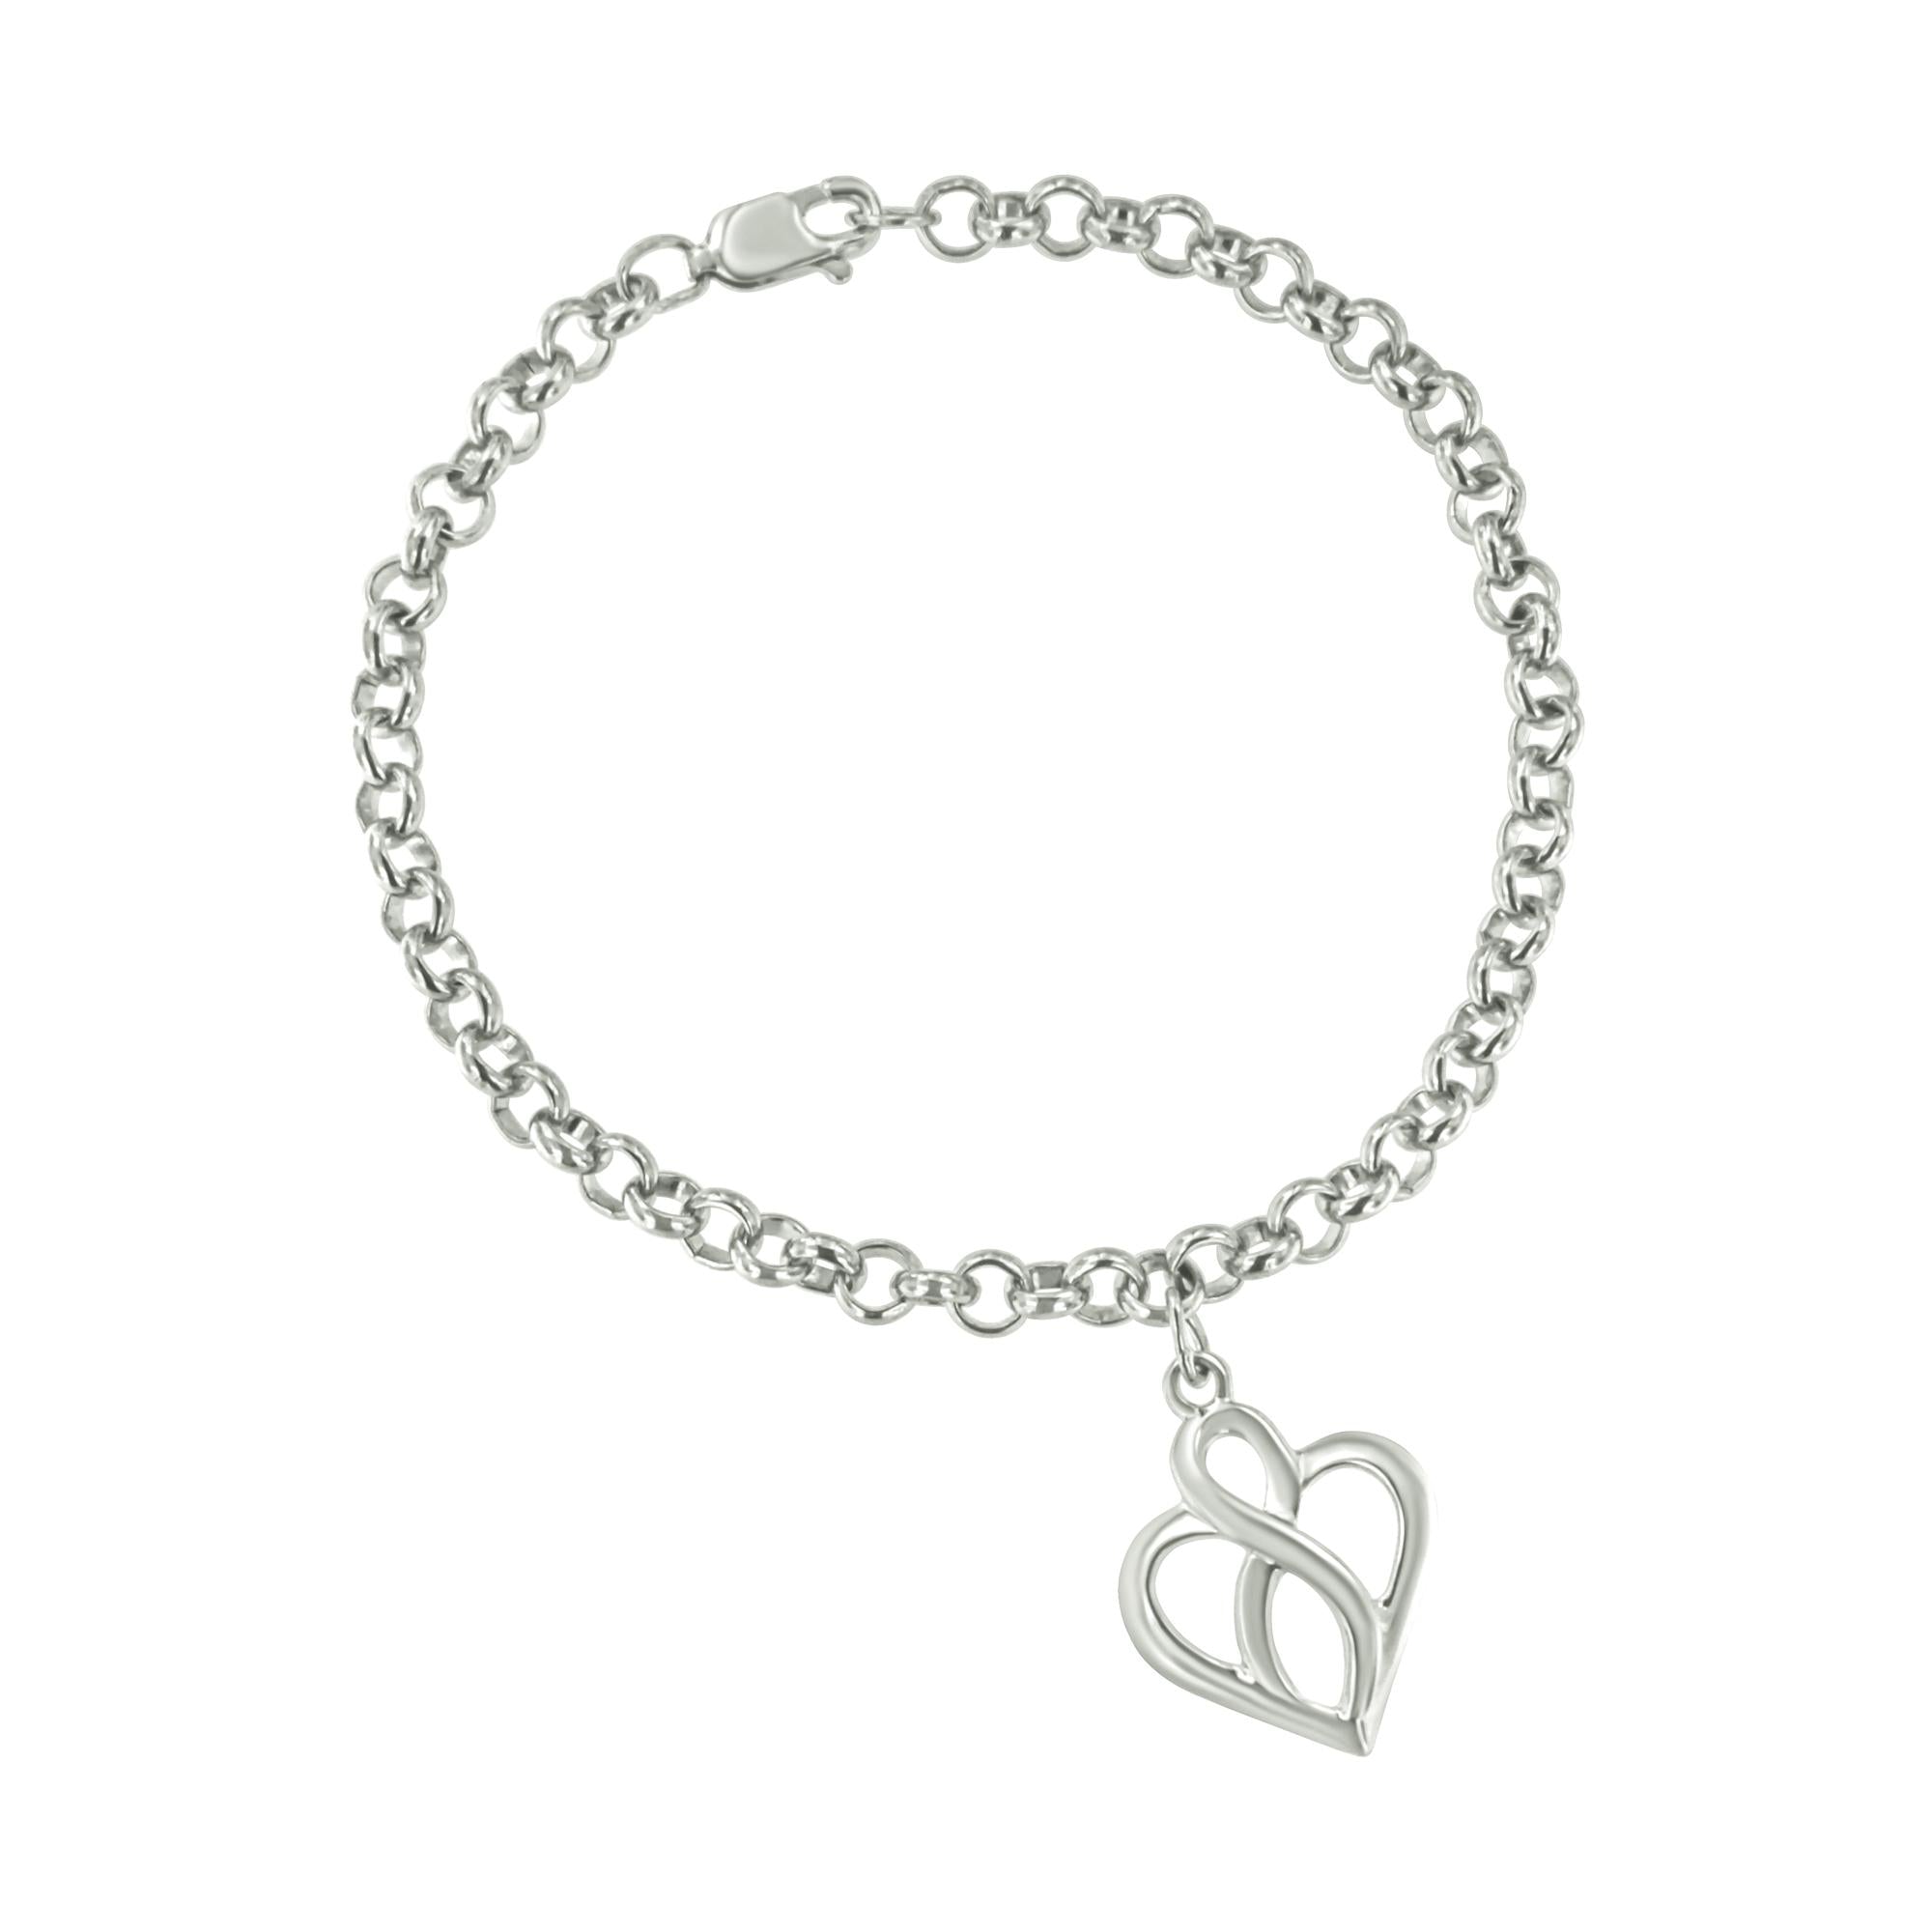 ''.925 Sterling Silver Open Heart with Center Vertical Infinity Chain CHARM Bracelet - Size 7''''''